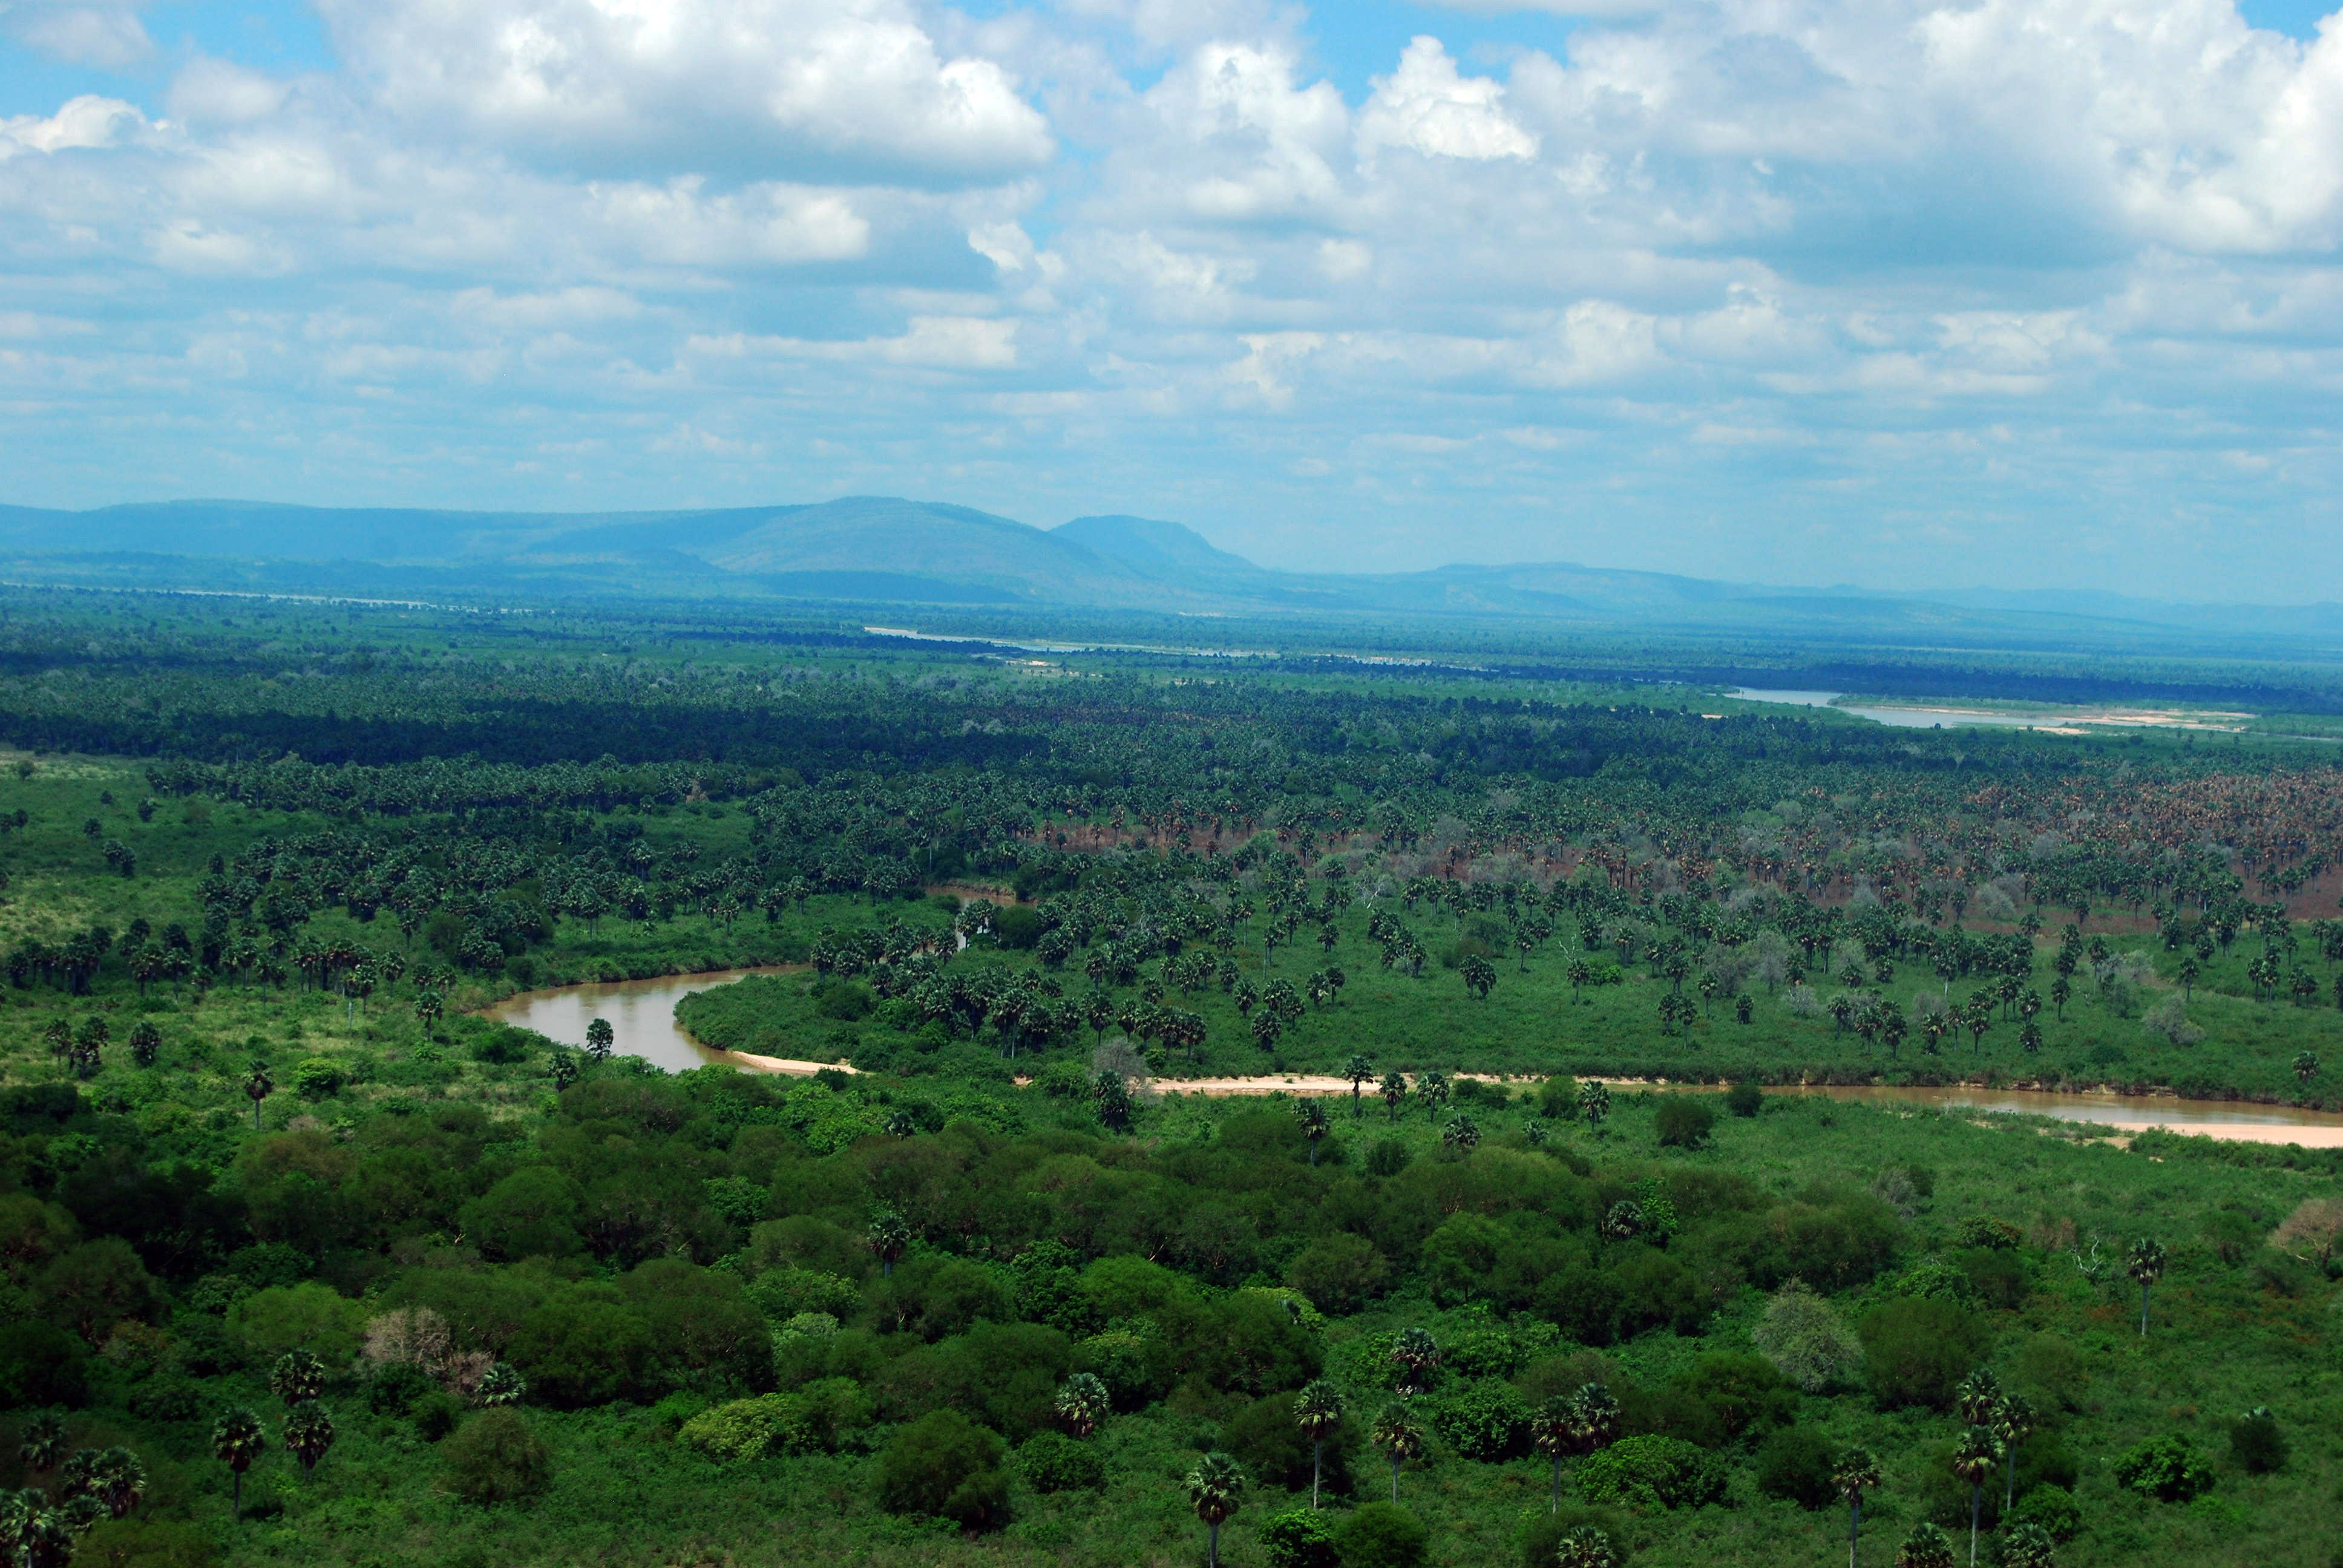 Selous Game Reserve, Africa's largest game reserve